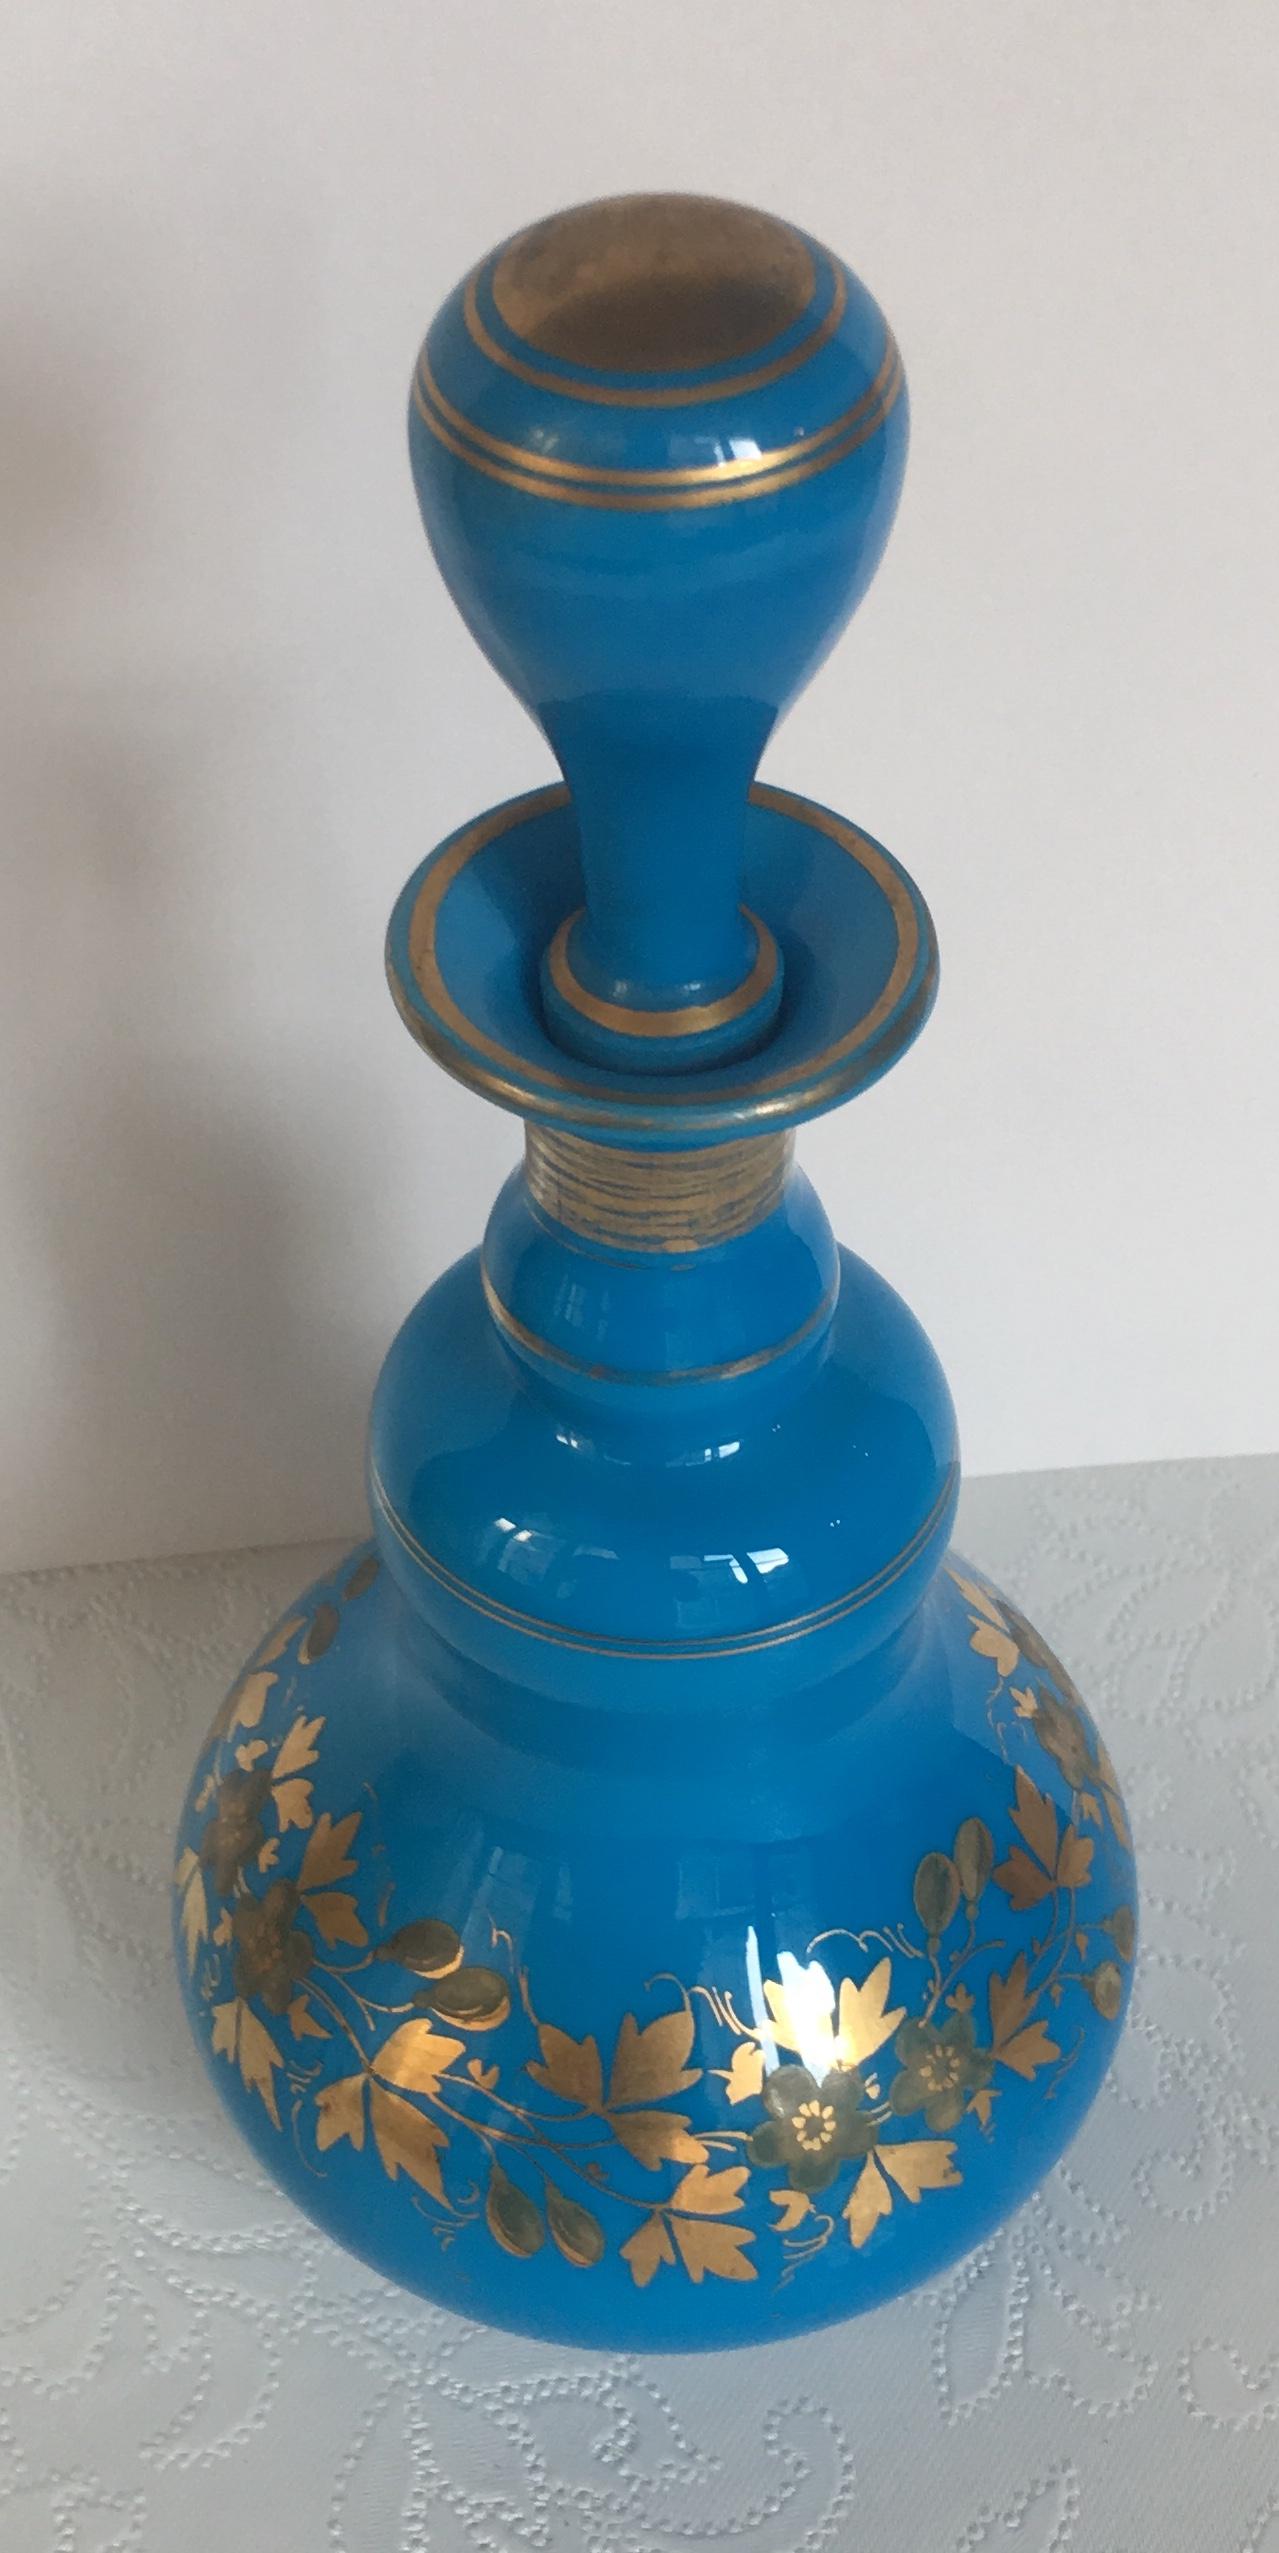 A beautiful French blue opaline glass perfume bottle dating from the 19th century. Unsigned Baccarat piece. 

Very attractive piece. Please see photos for details. Very good condition with some minor fading from use. 

No cracks or chips. 
 